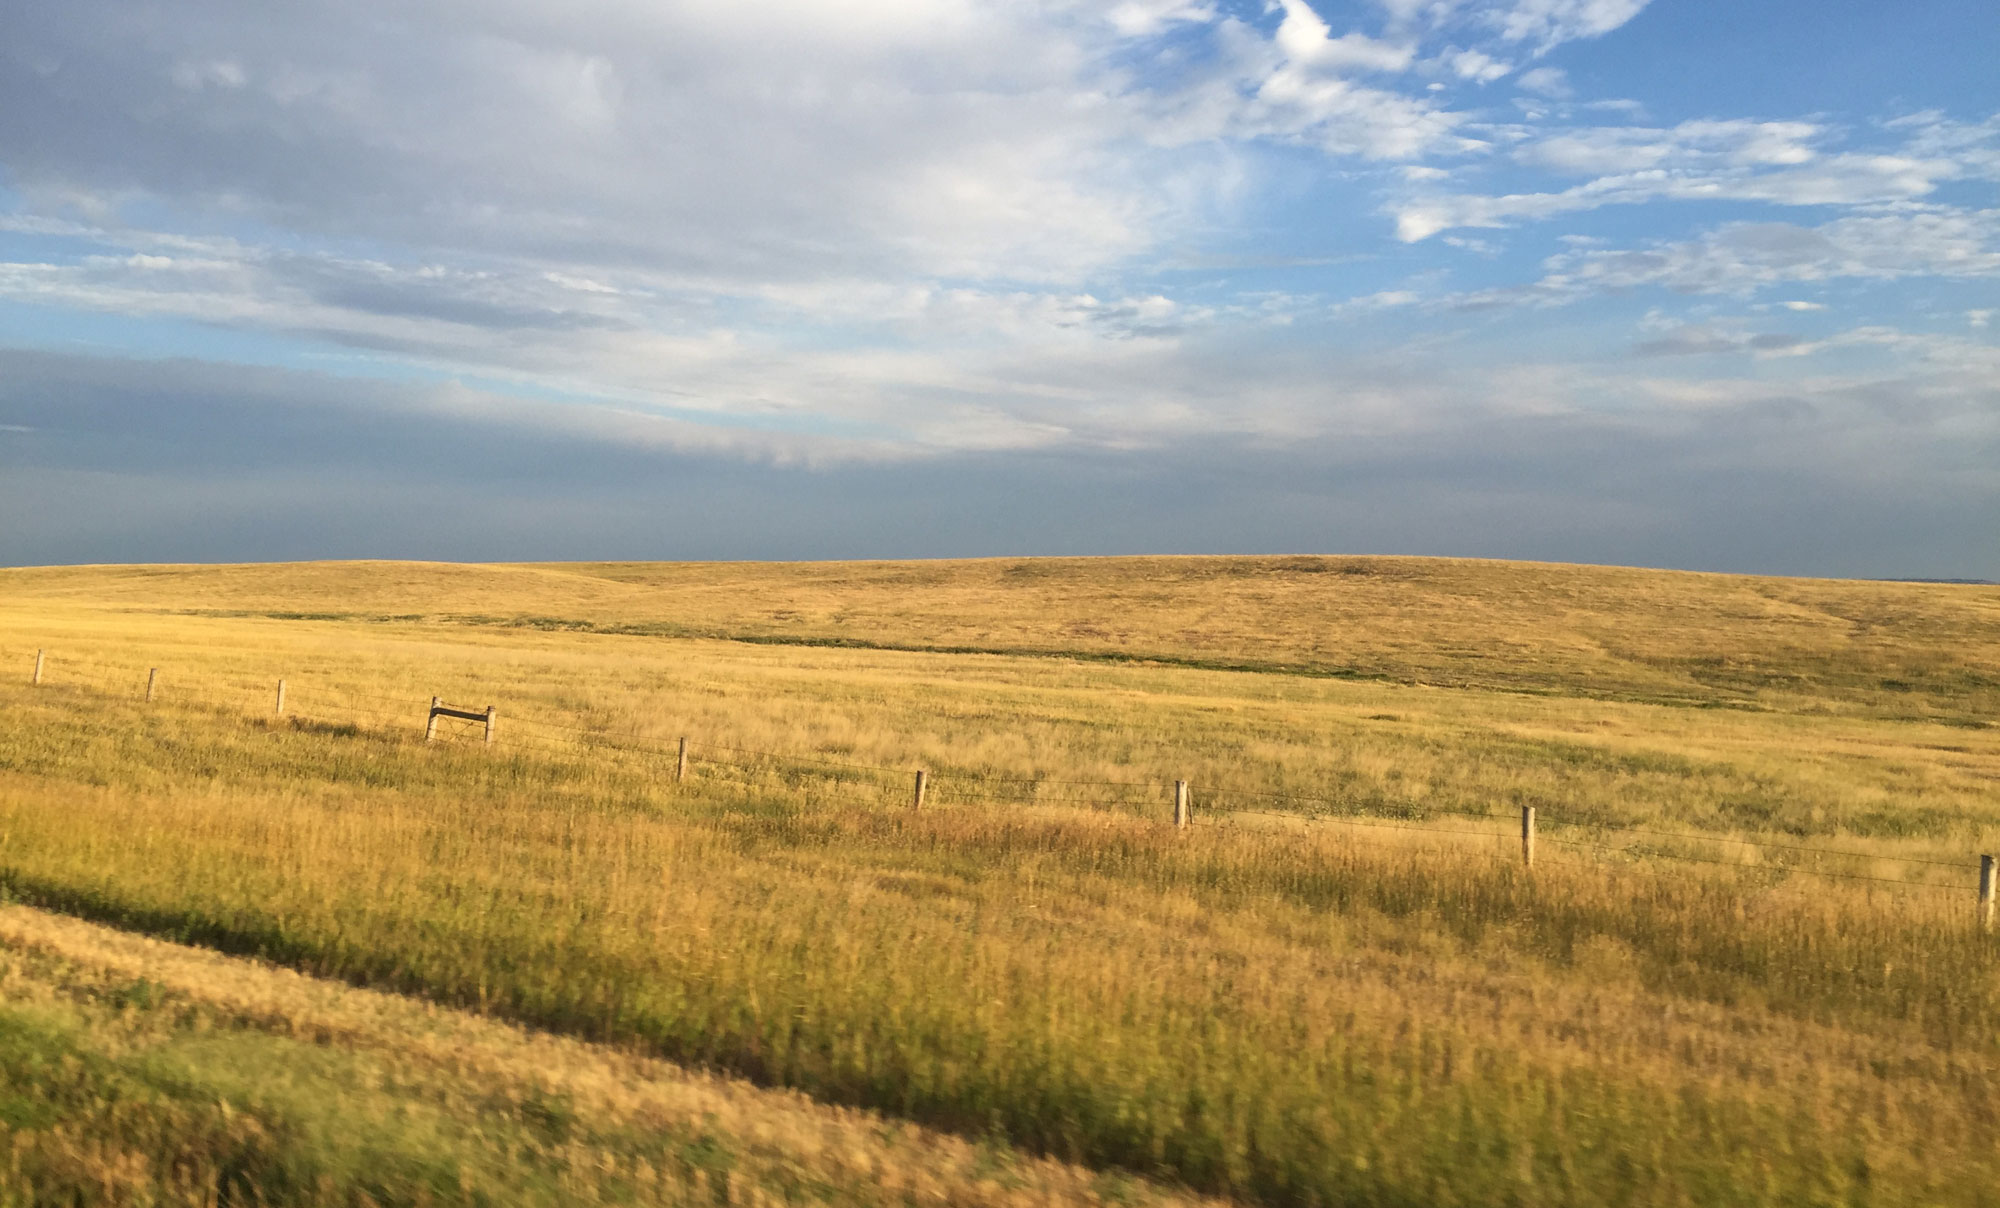 Photograph of Oglala National Grasslands, Nebraska. The photo shows a field with a very slight rise in the background. The field is covered in yellow grass. A fence made of regularly spaced wooden posts connected by wire cuts through the field slightly obliquely from left to right.